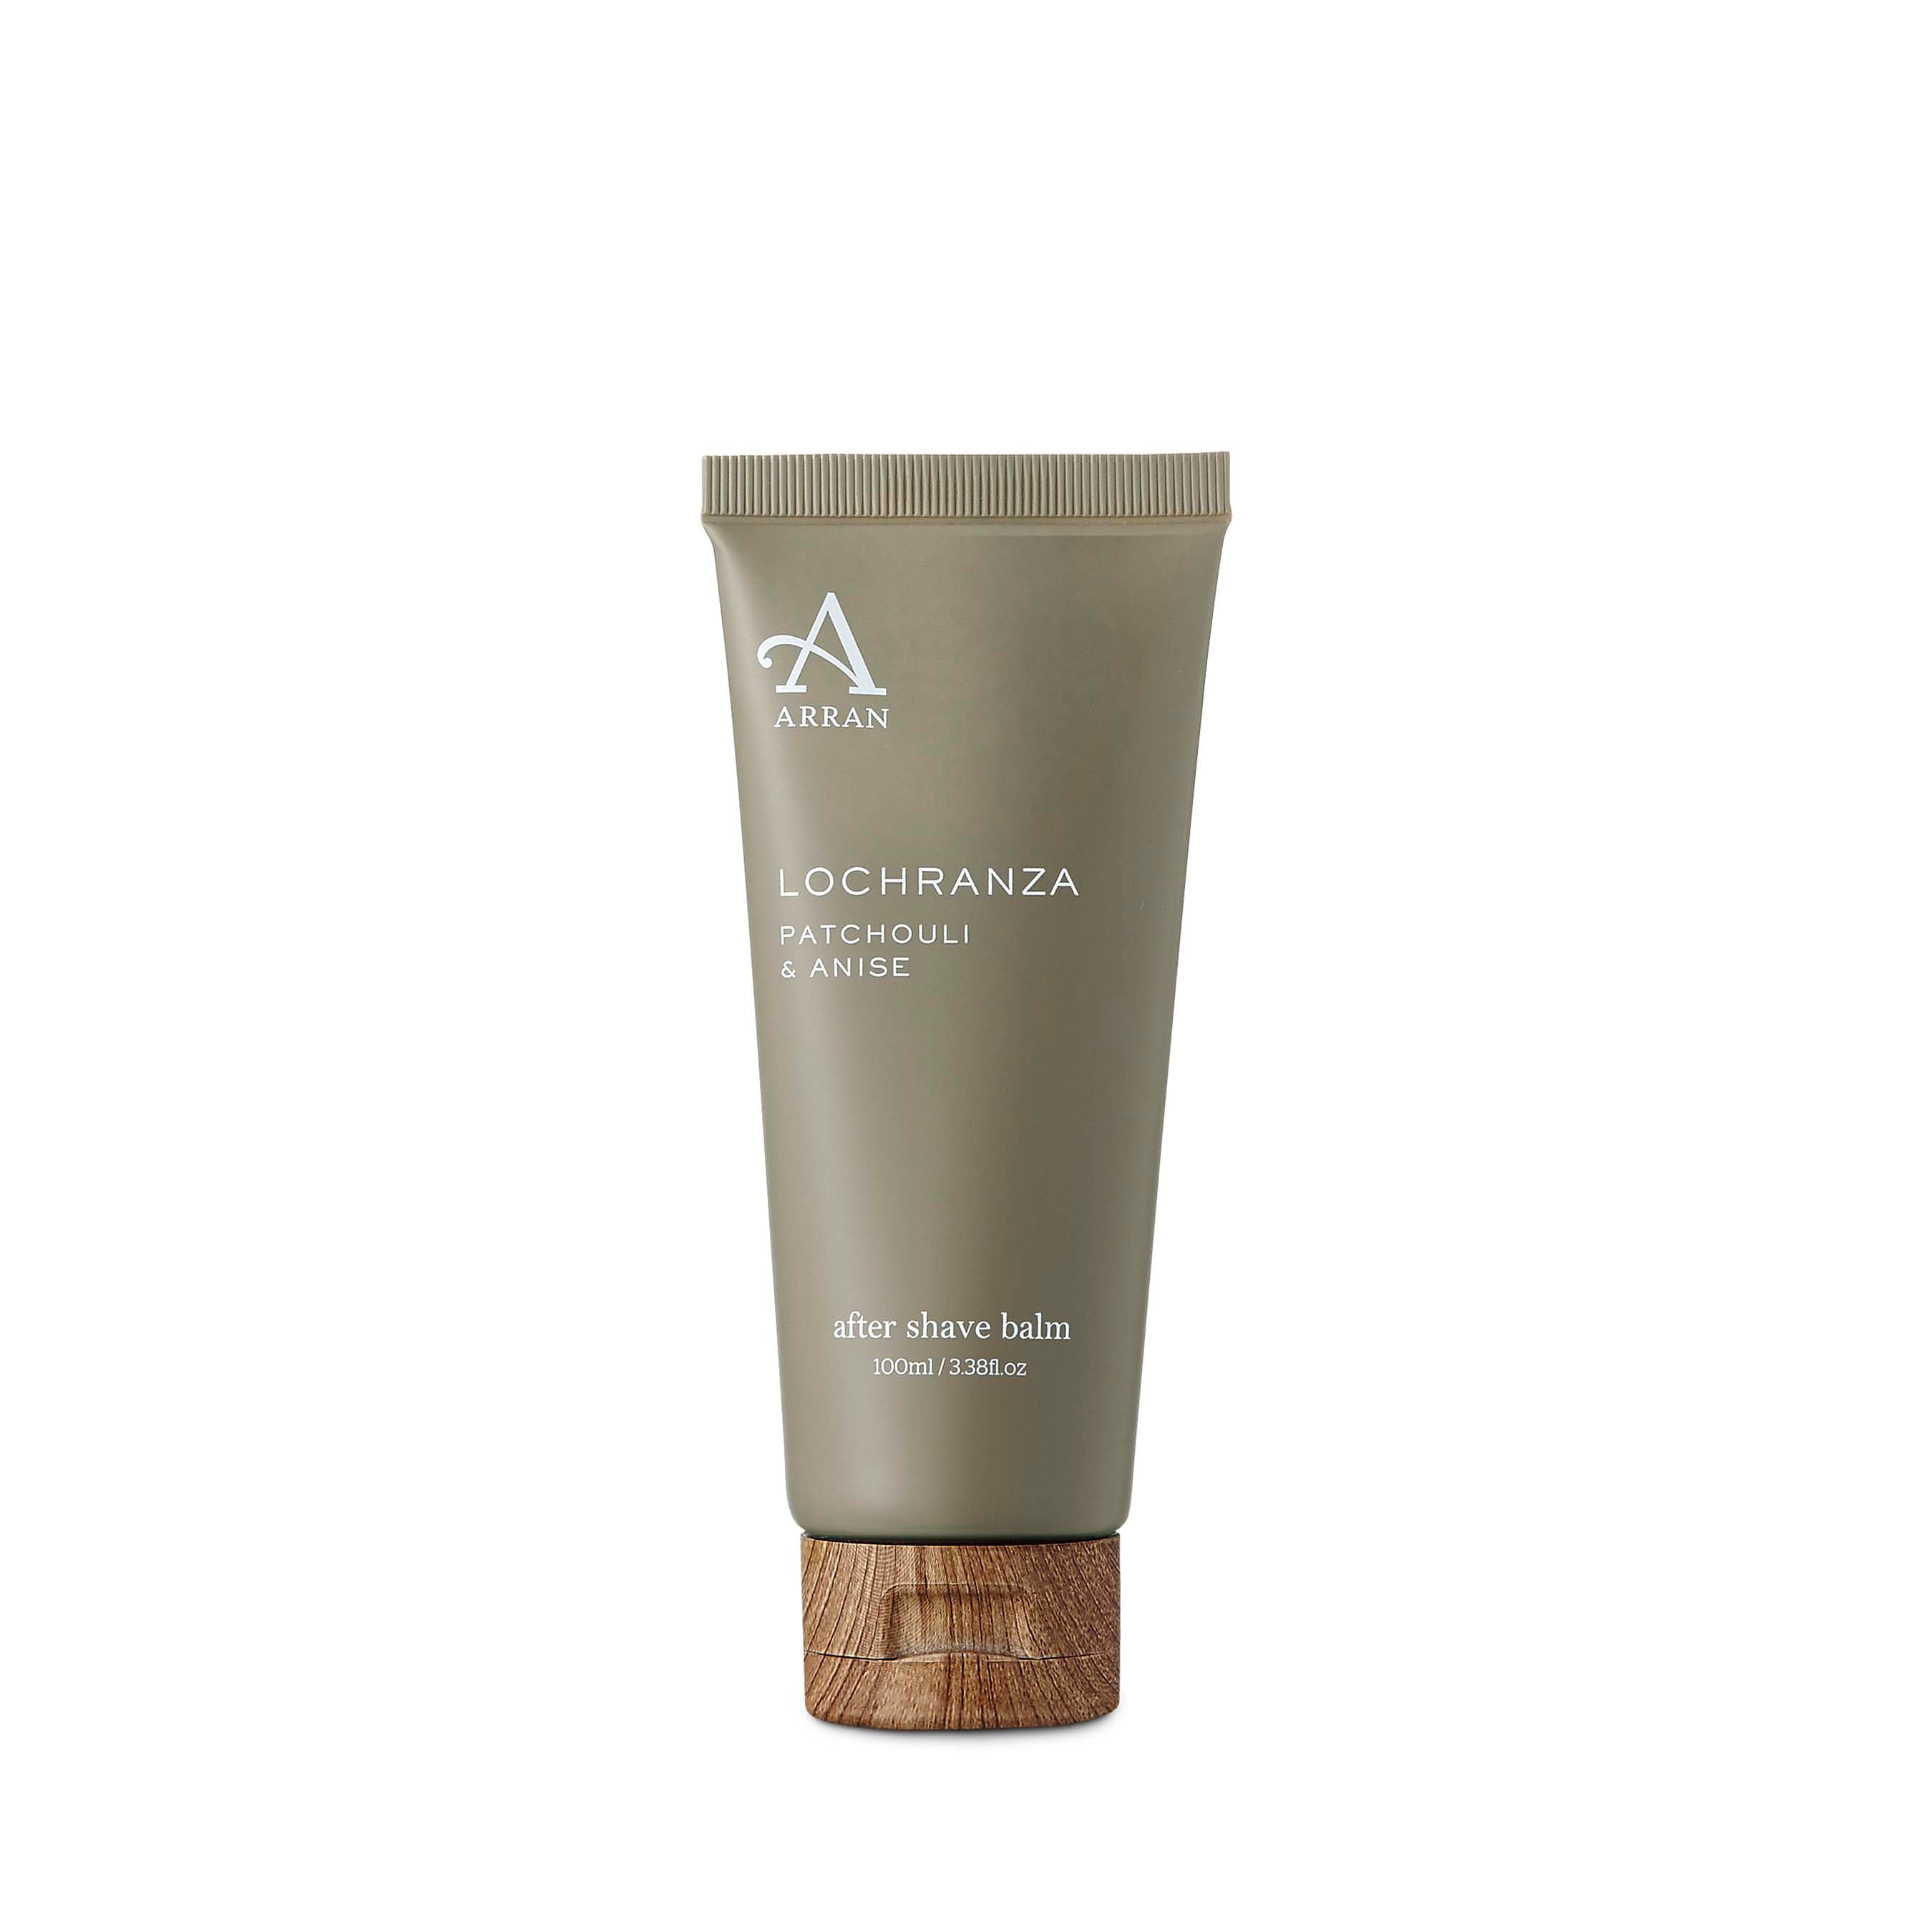 An image of ARRAN Lochranza Men's Aftershave Balm 100ml | Made in Scotland | Patchouli & Ani...